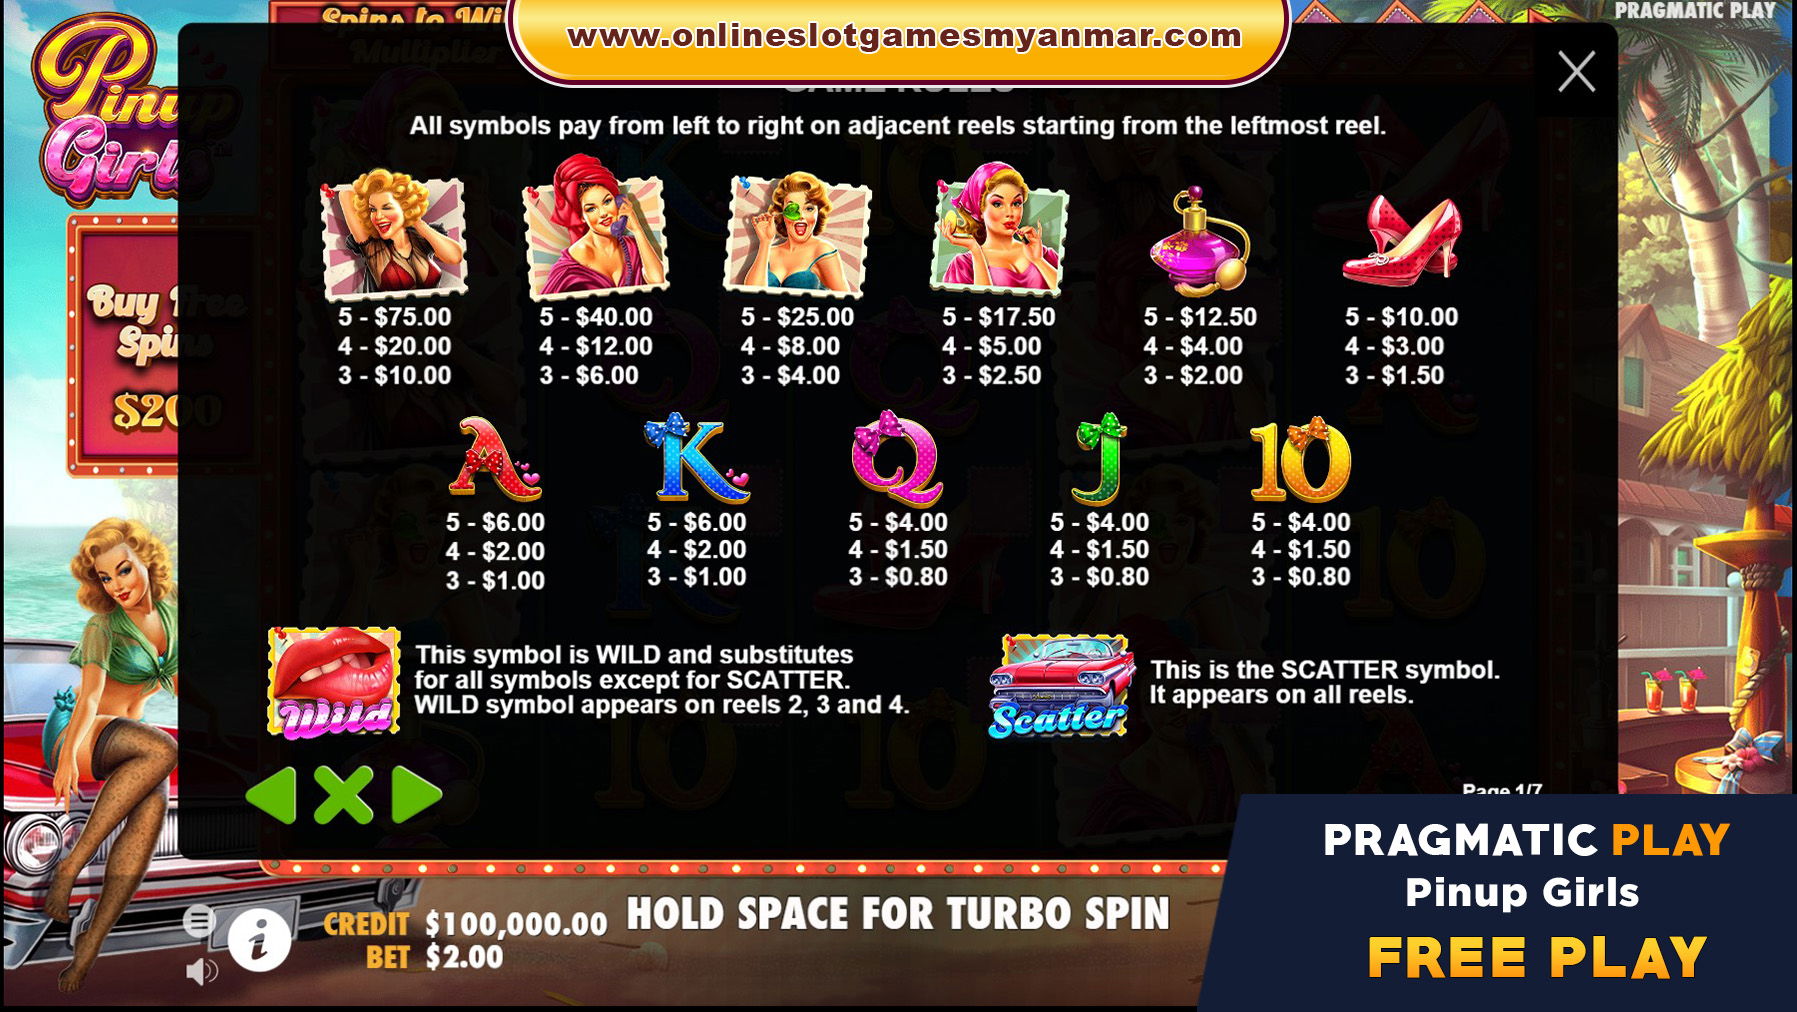 Pragmatic Play Slot Game - Monster Superlanche Payout